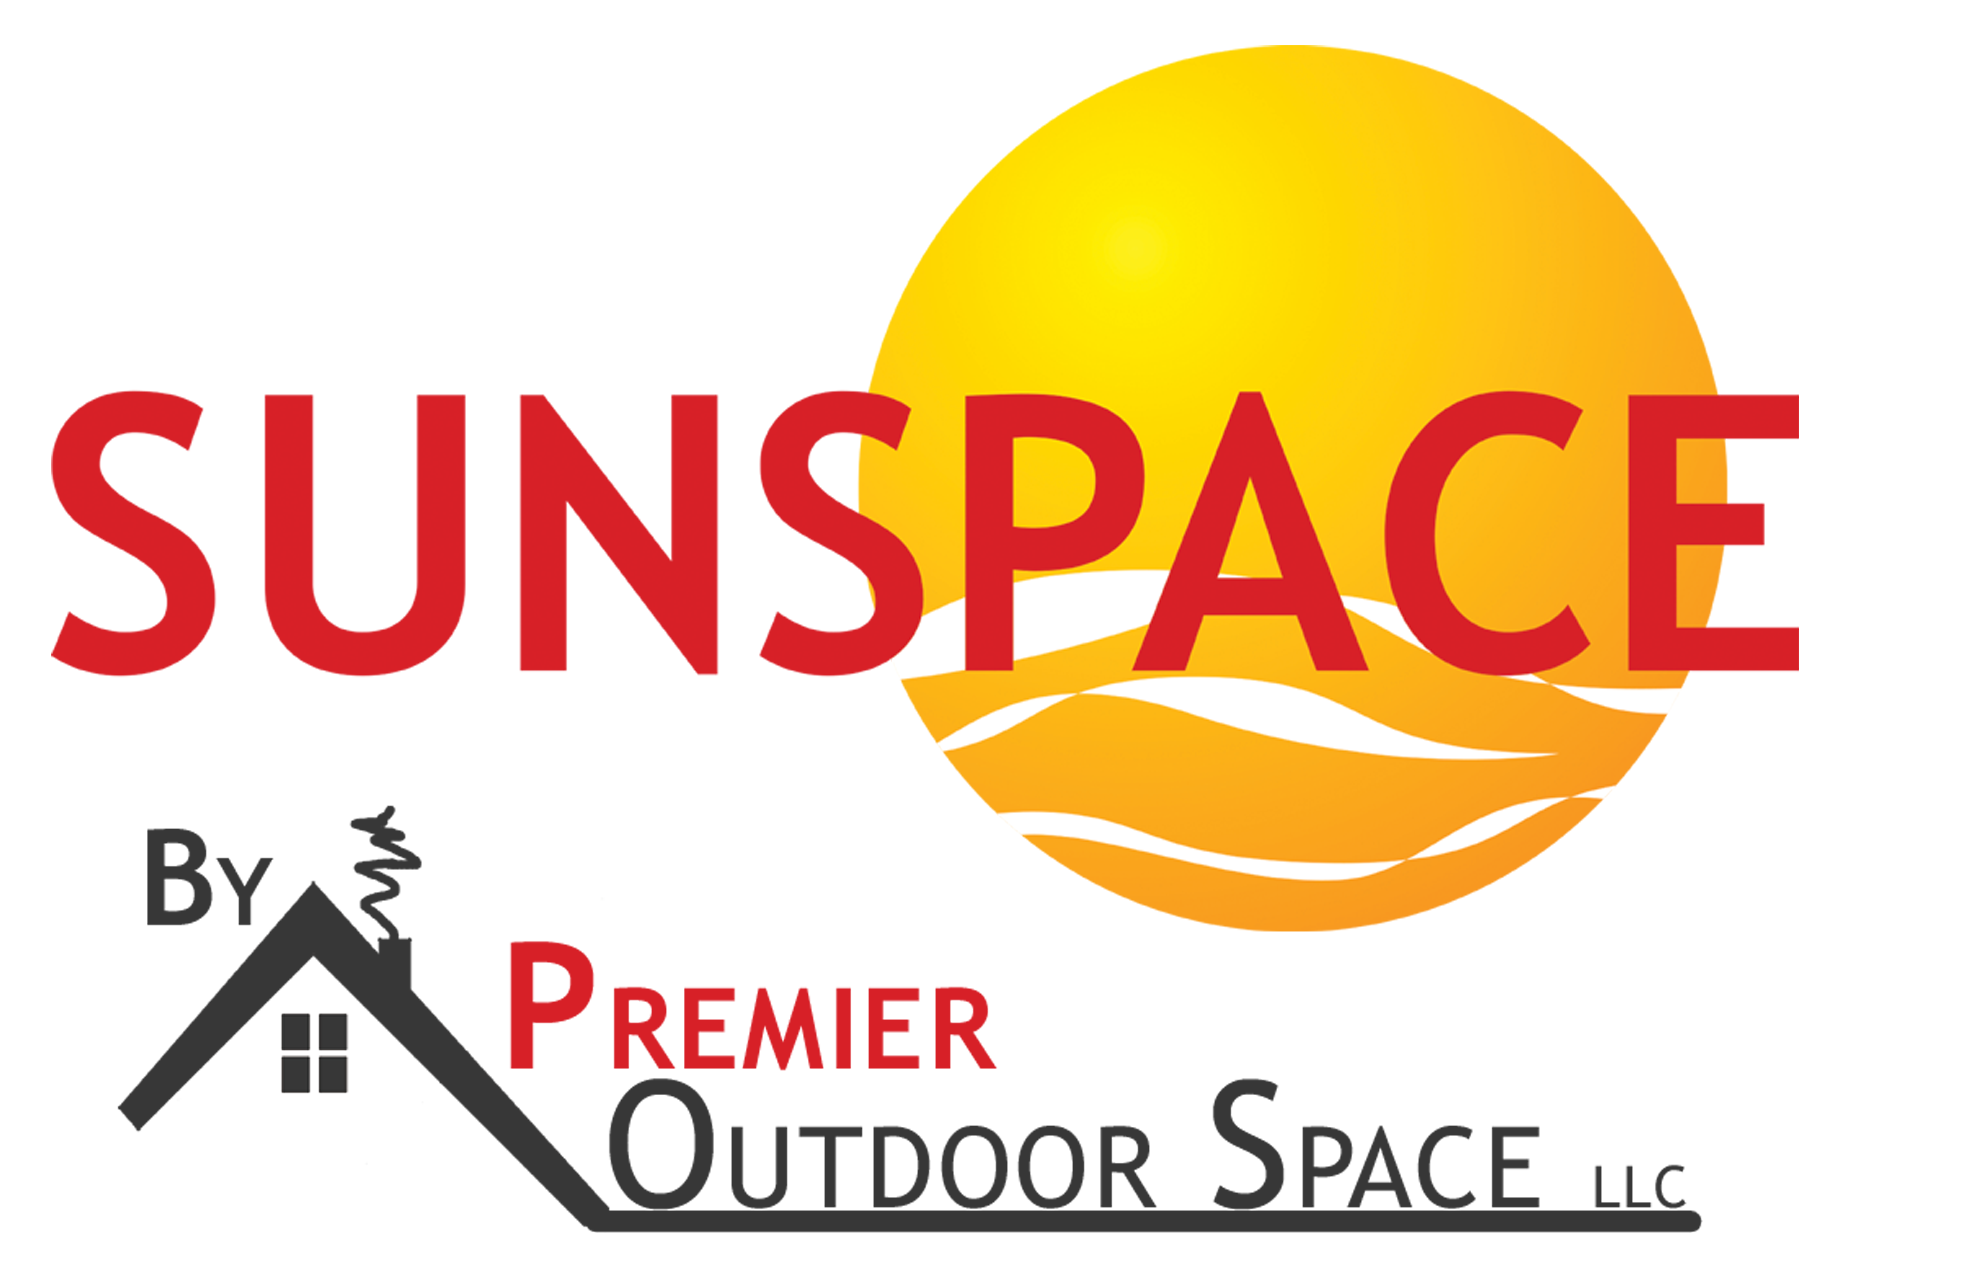 Sunspace By Premier Outdoor Space logo